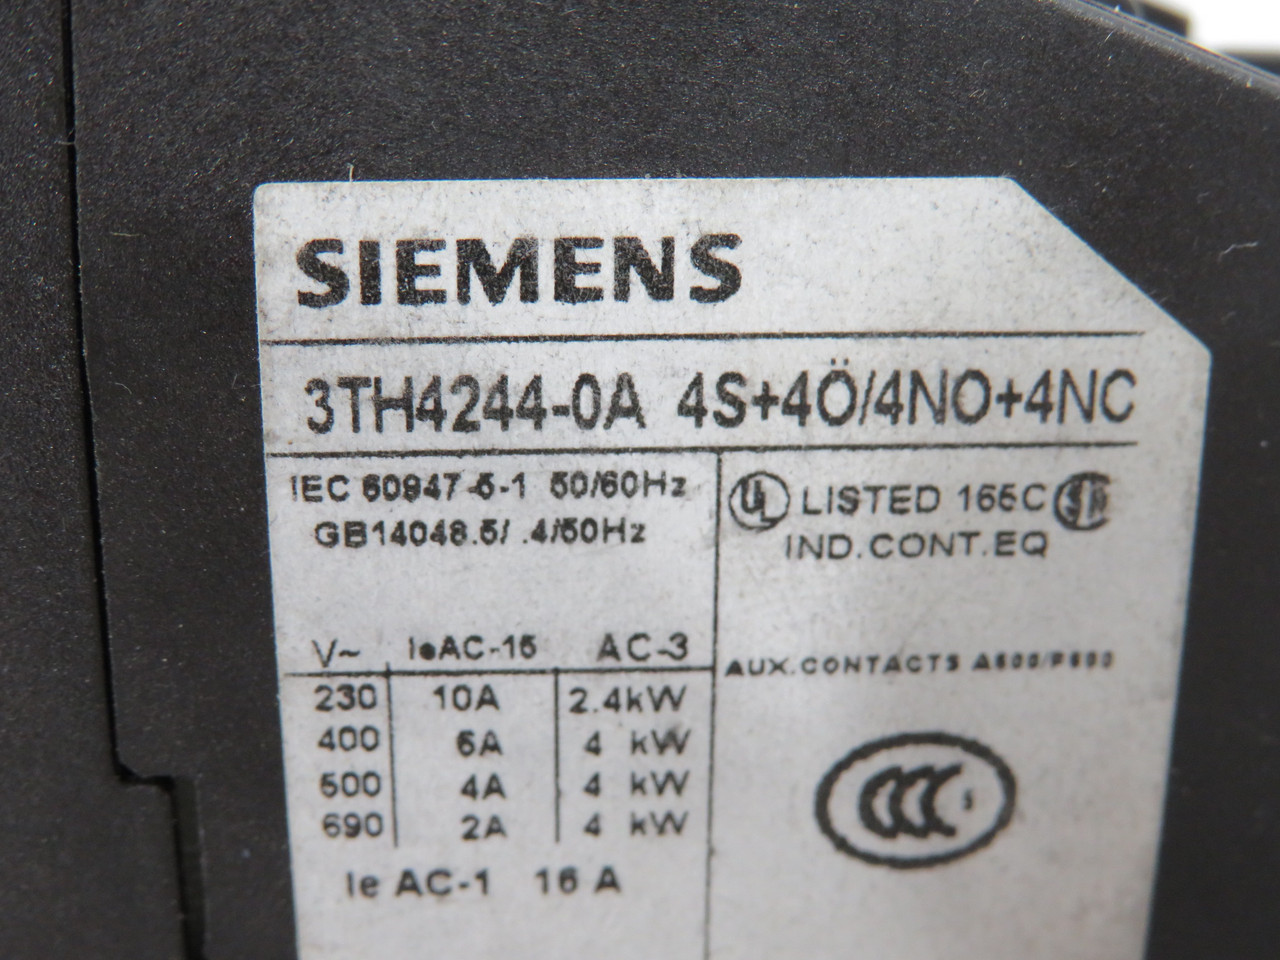 Siemens 3TH4244-0AN2 Contactor 220V@50/60Hz 4S 4O 4NO 4NC USED